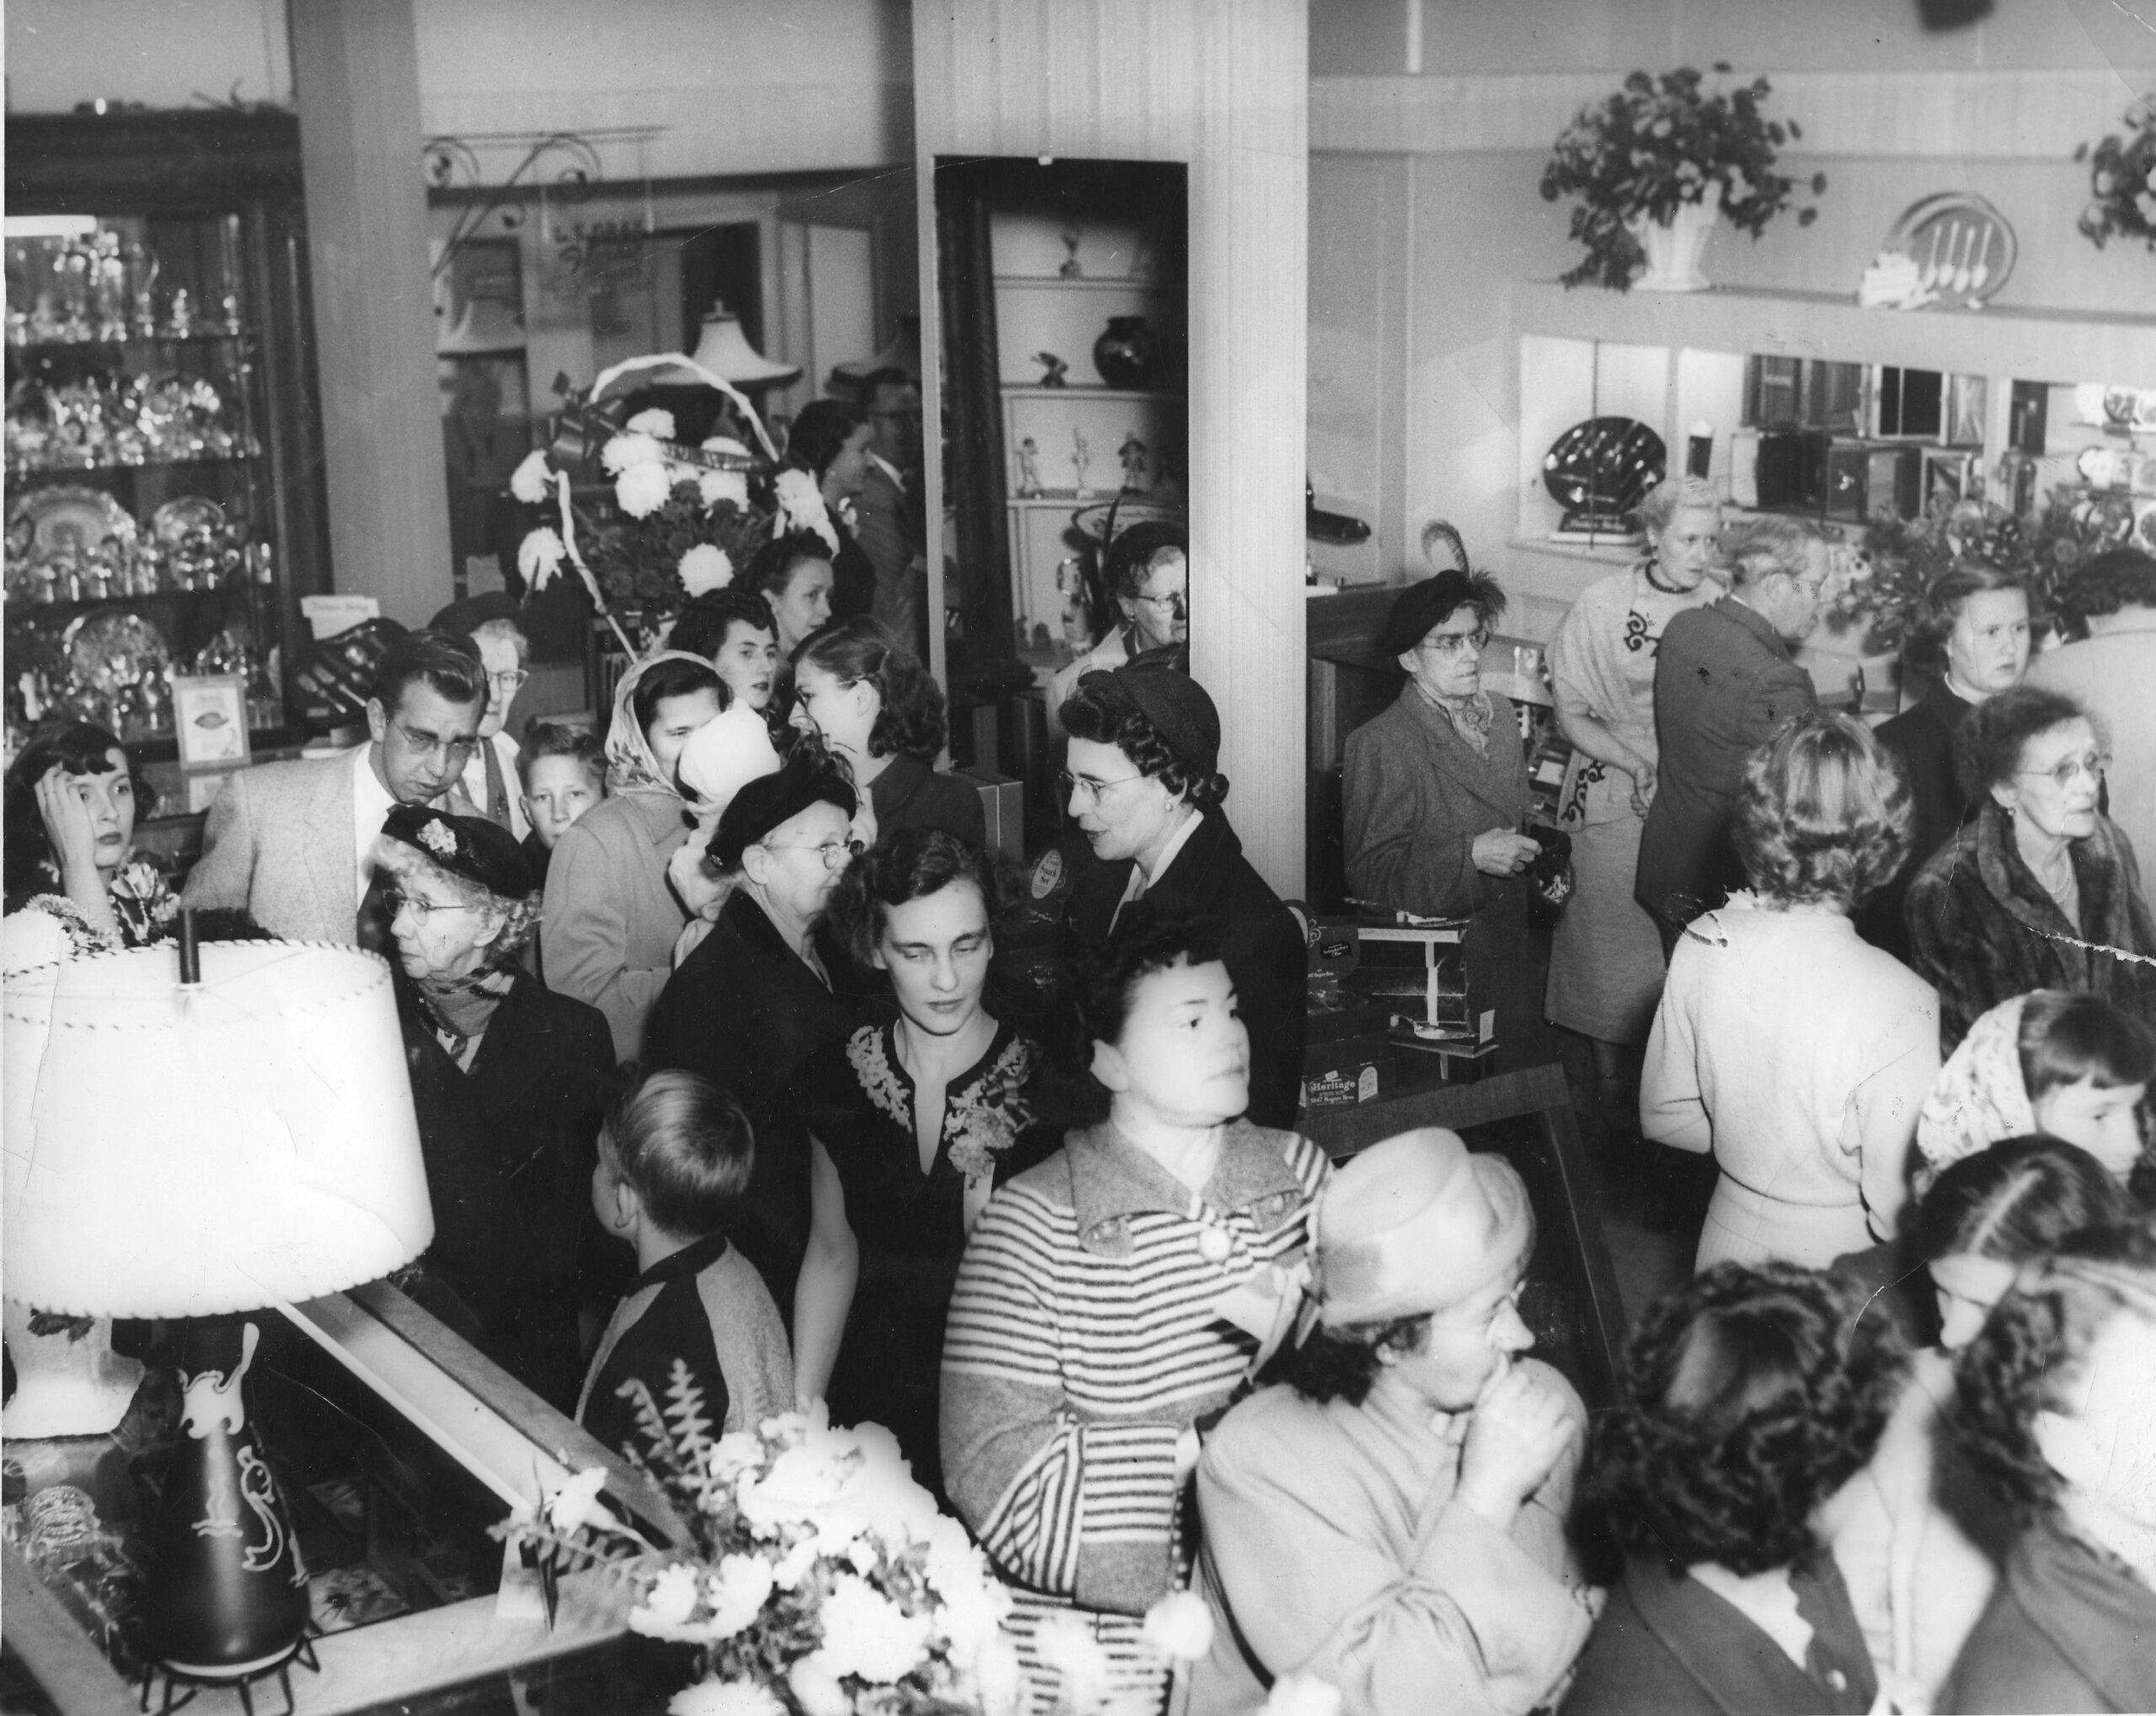 A crowd of people inside a shop.